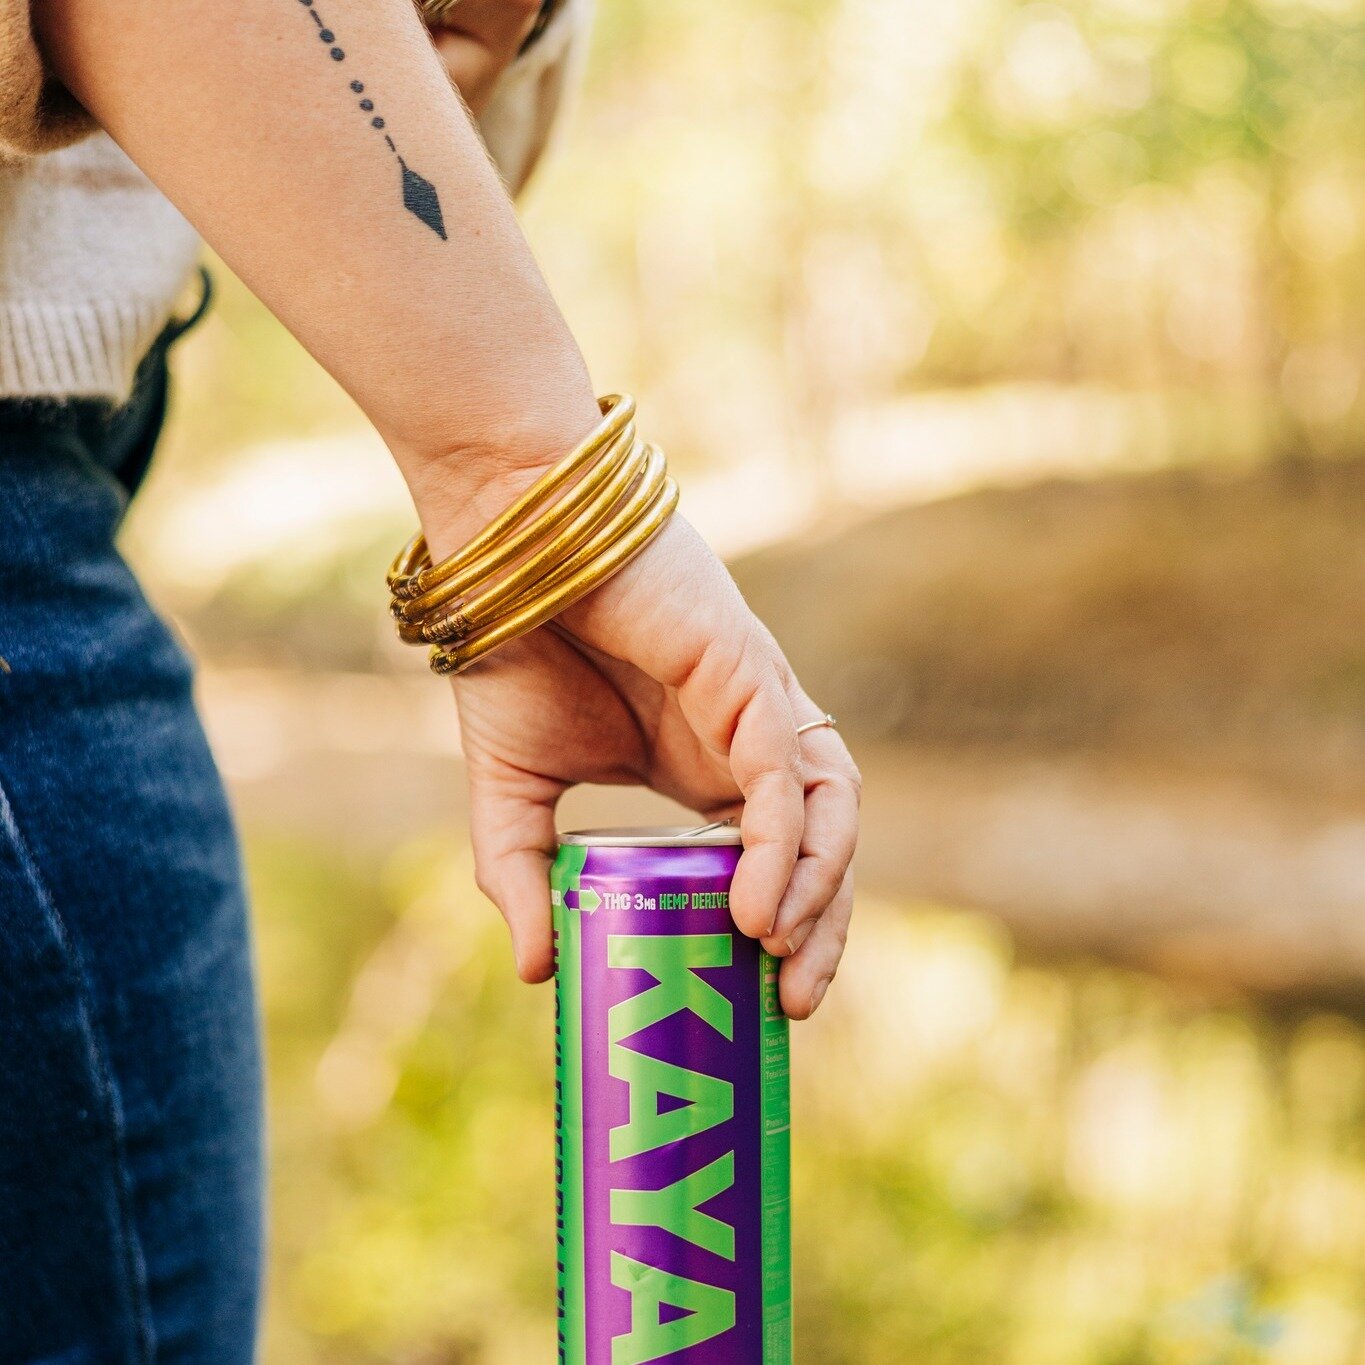 Elevate your experience, one sip at a time. 🌿✨ #THCTaste  #DrinkKaya #AlcoholFree #Wellness #FueledByTHC #SoberCurious #CannaCurious